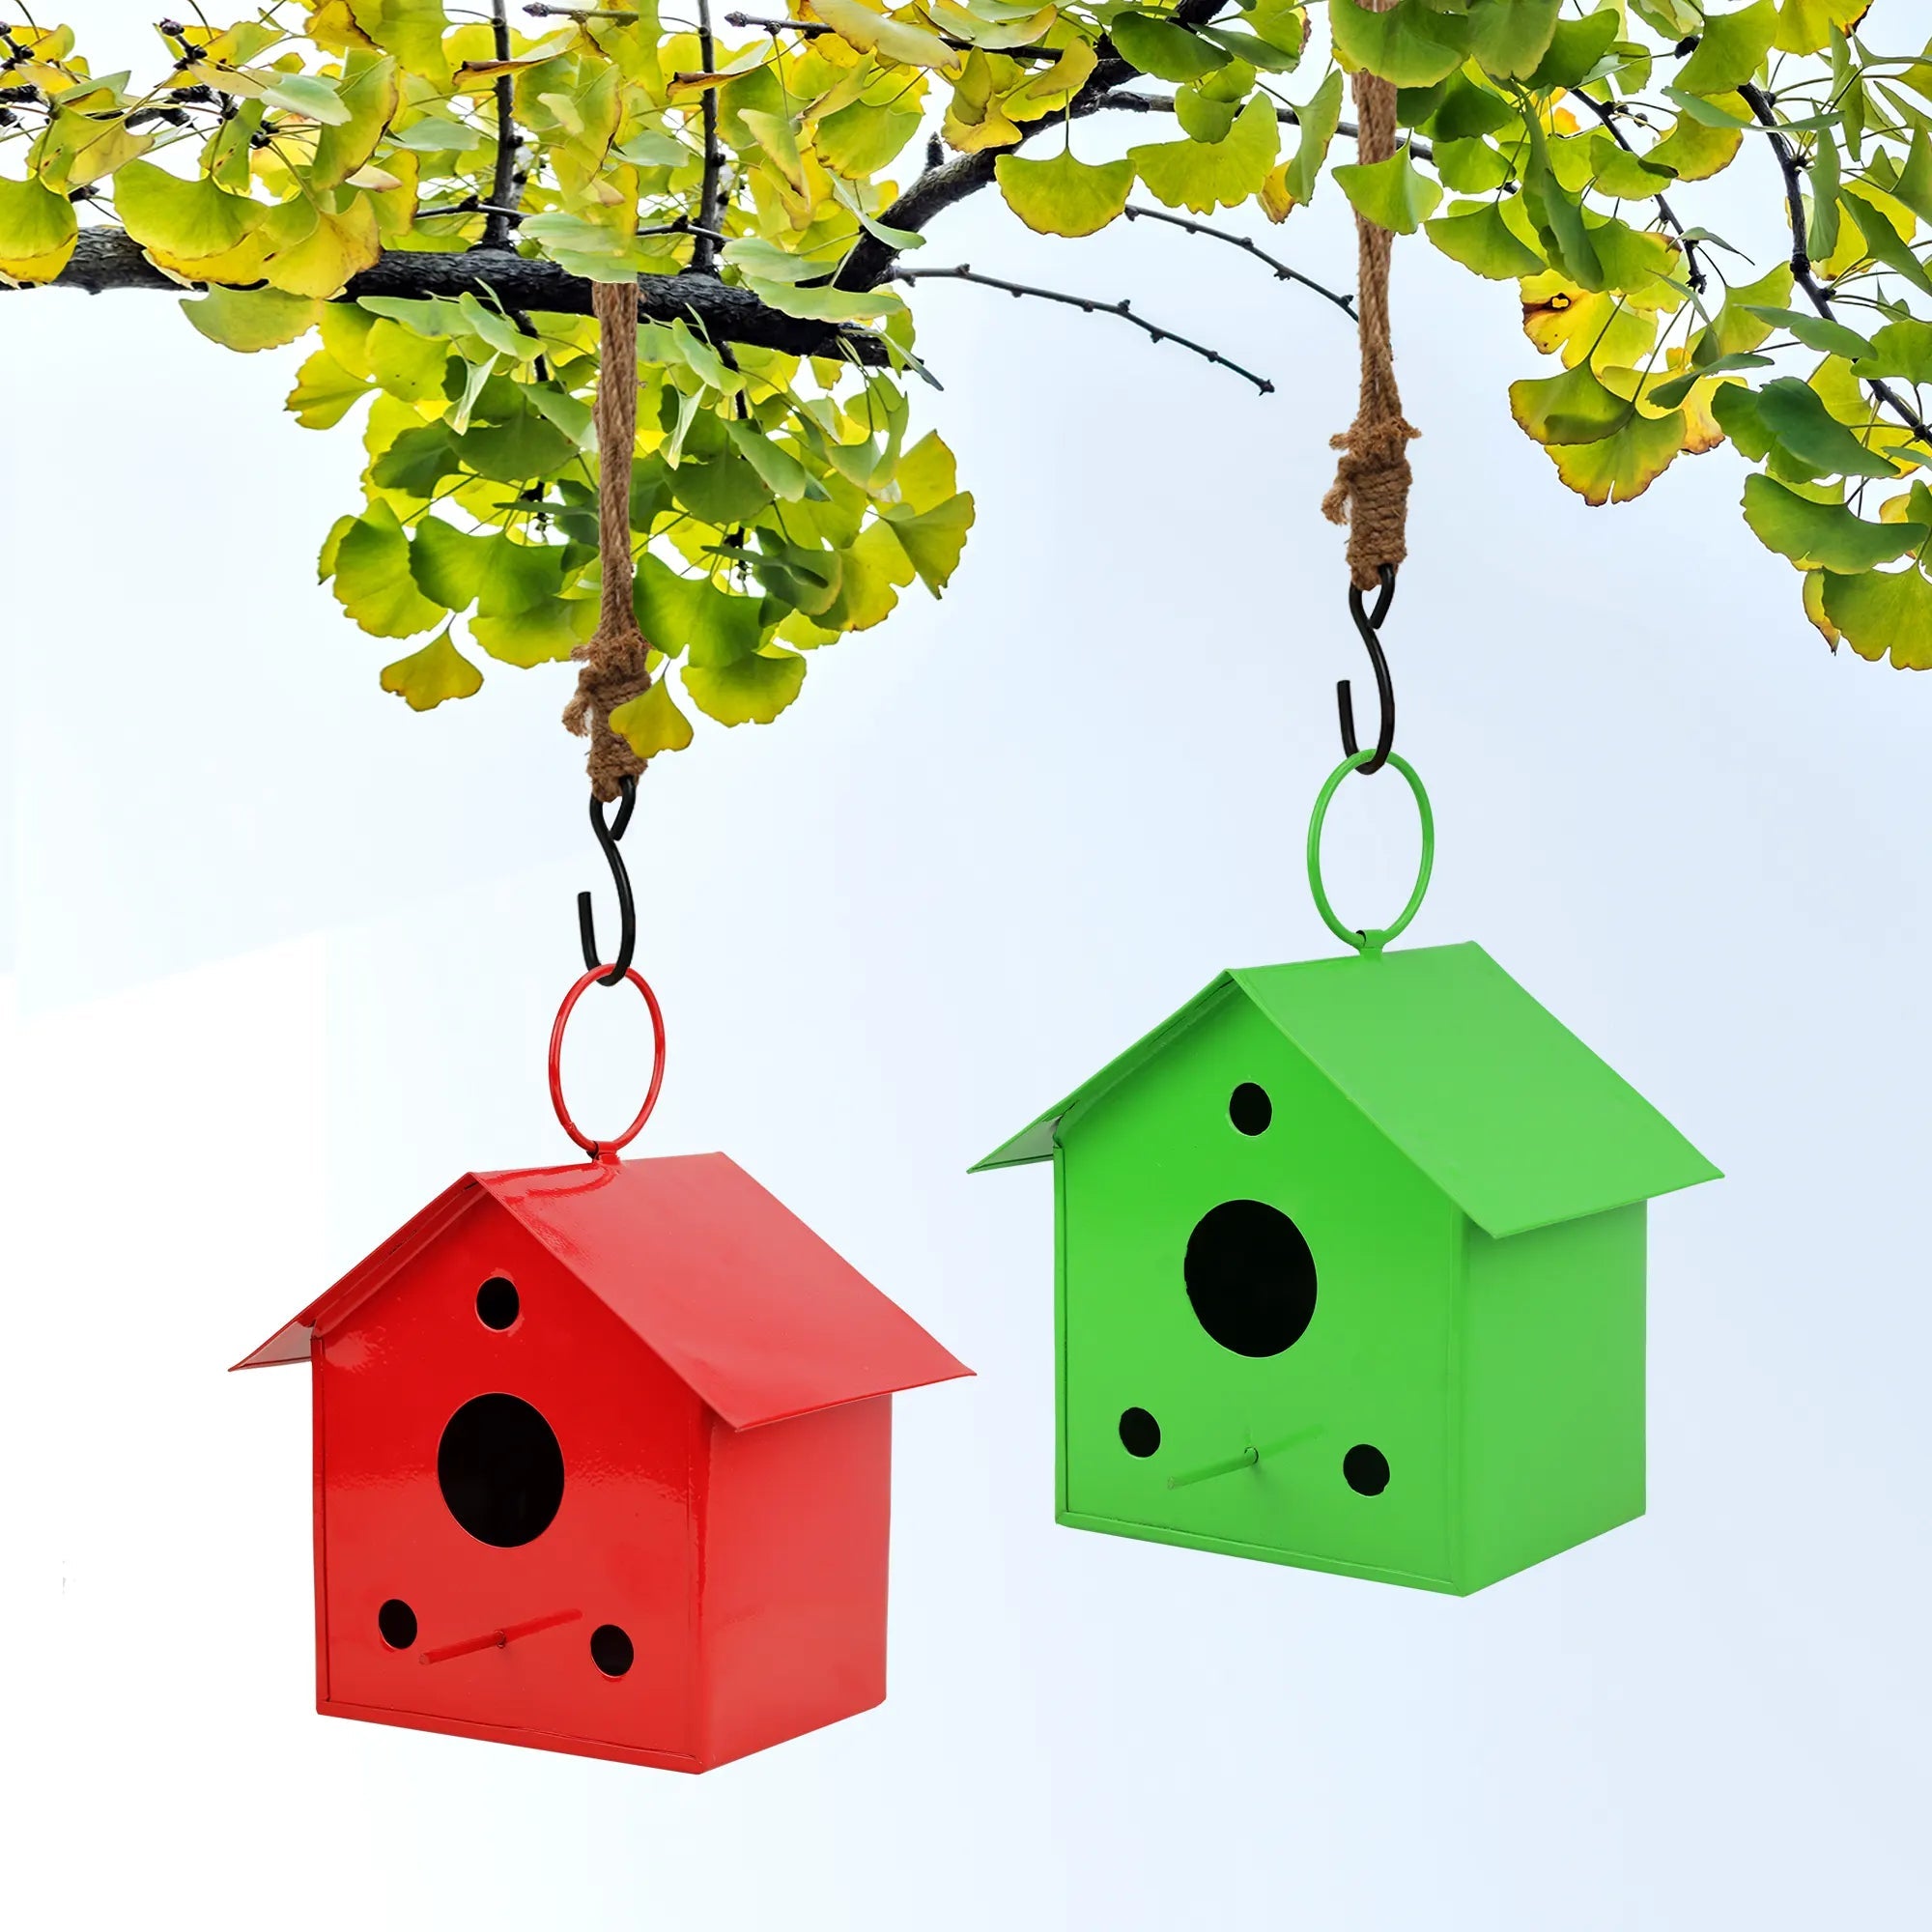 Colorful Metal Hanging Bird House Combo (Red & Green) Bird House Urban Plant Red & Green 